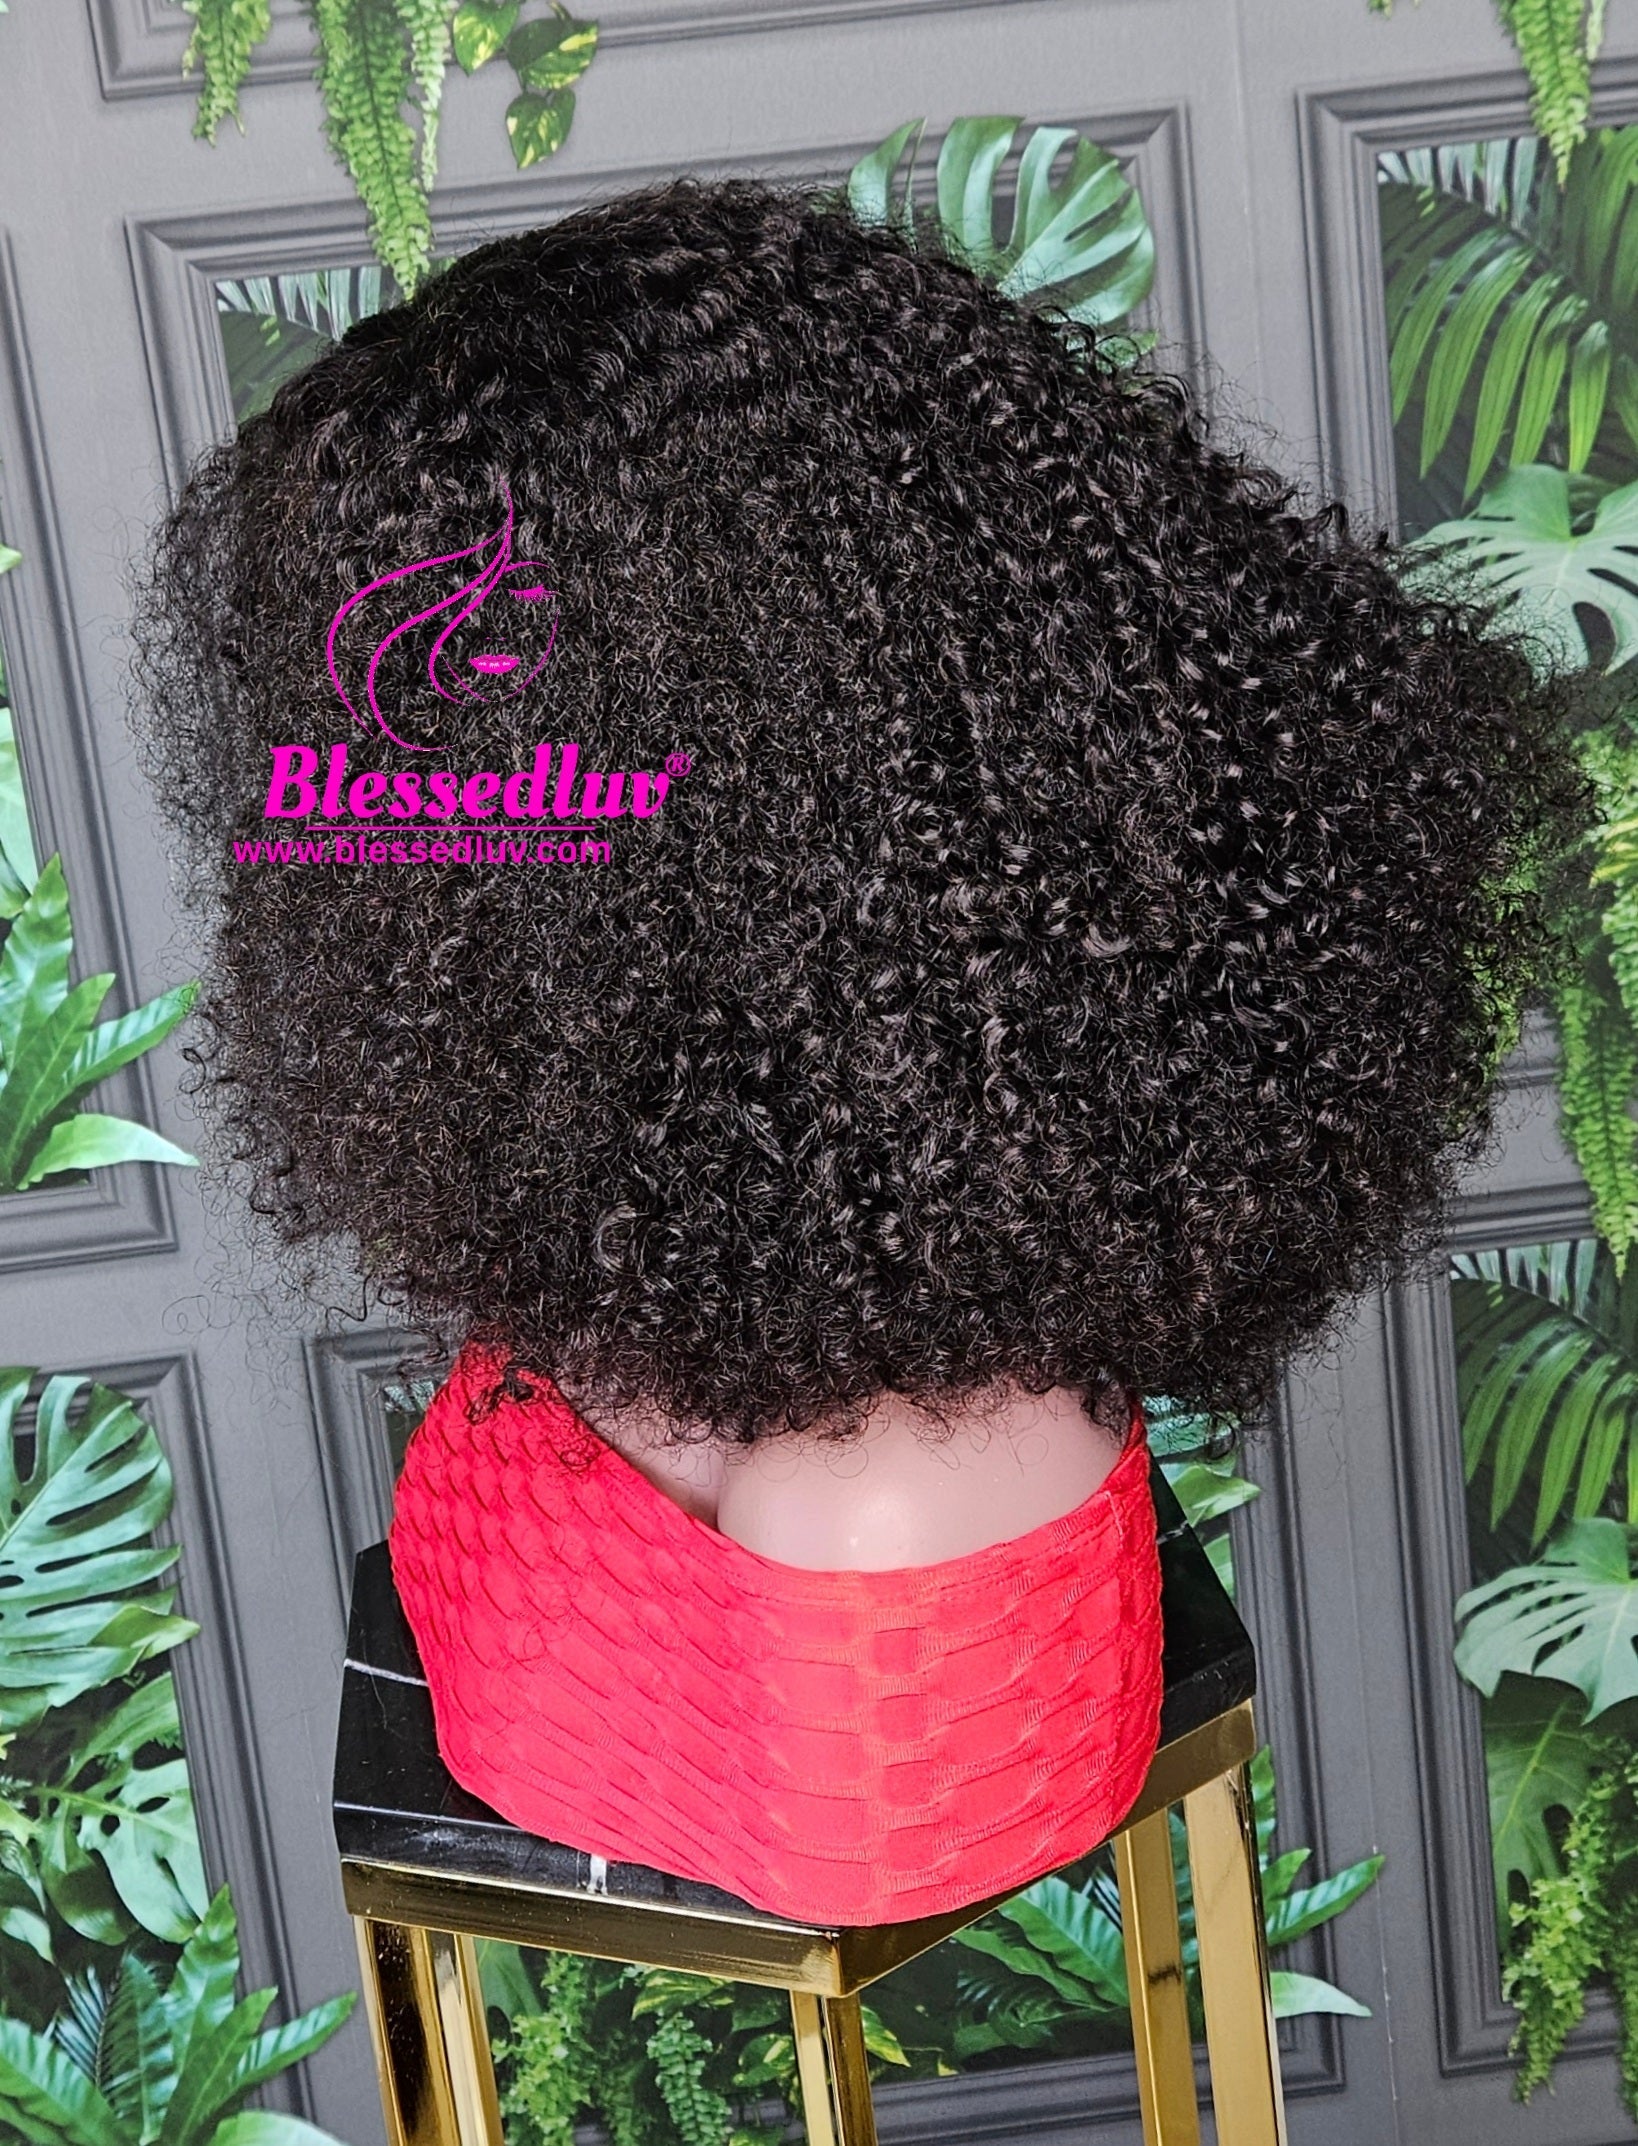 Ngozi - 2 -In-1 Luxury Afro Curls Lace Closure Wig-WIG-www.blessedluv.com-Brazilianweave.com